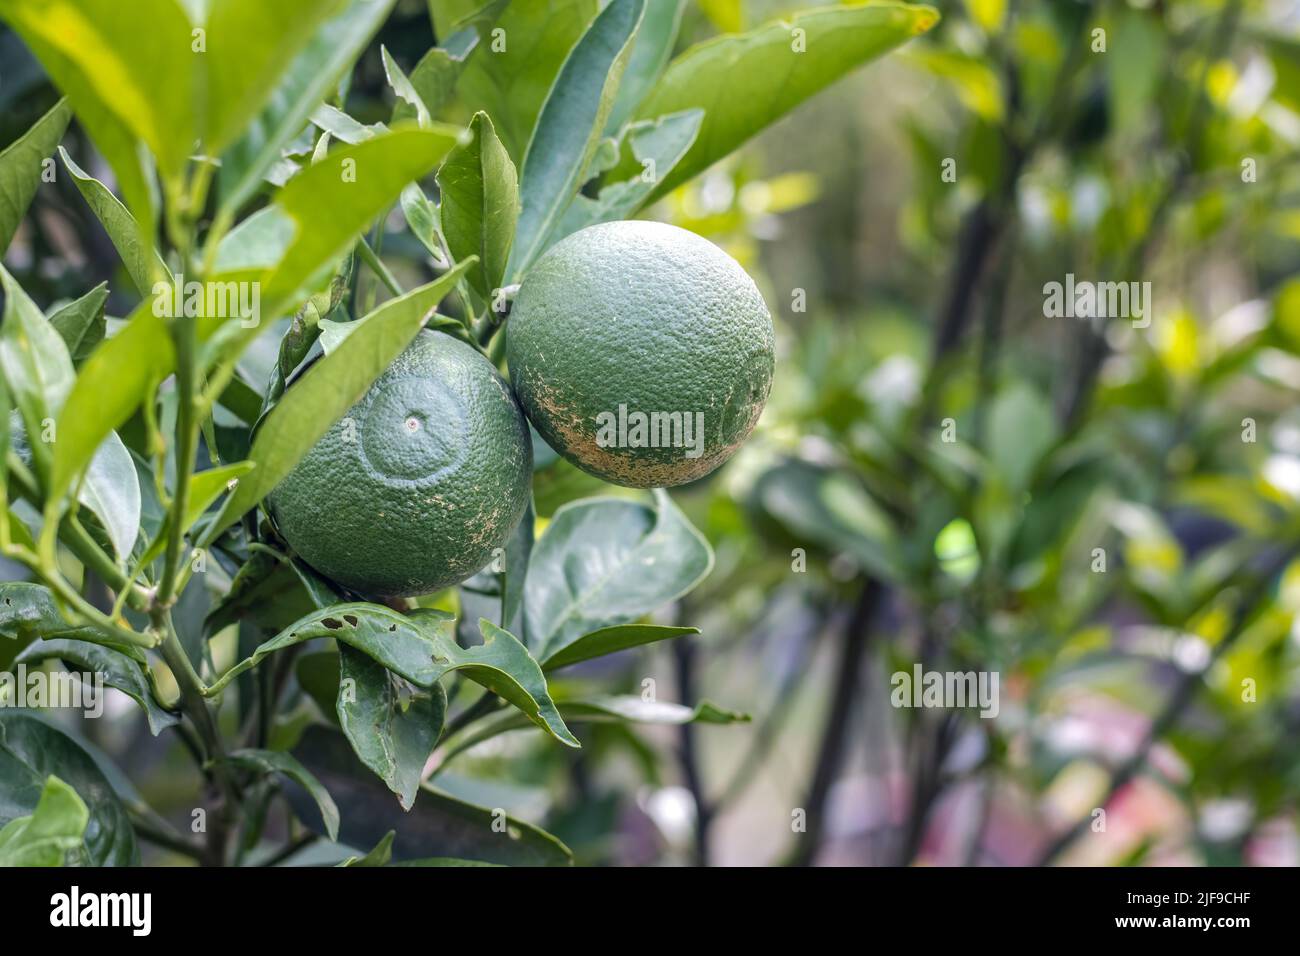 Young citrus fruit tangerine growing on a branch in the garden with copy space Stock Photo